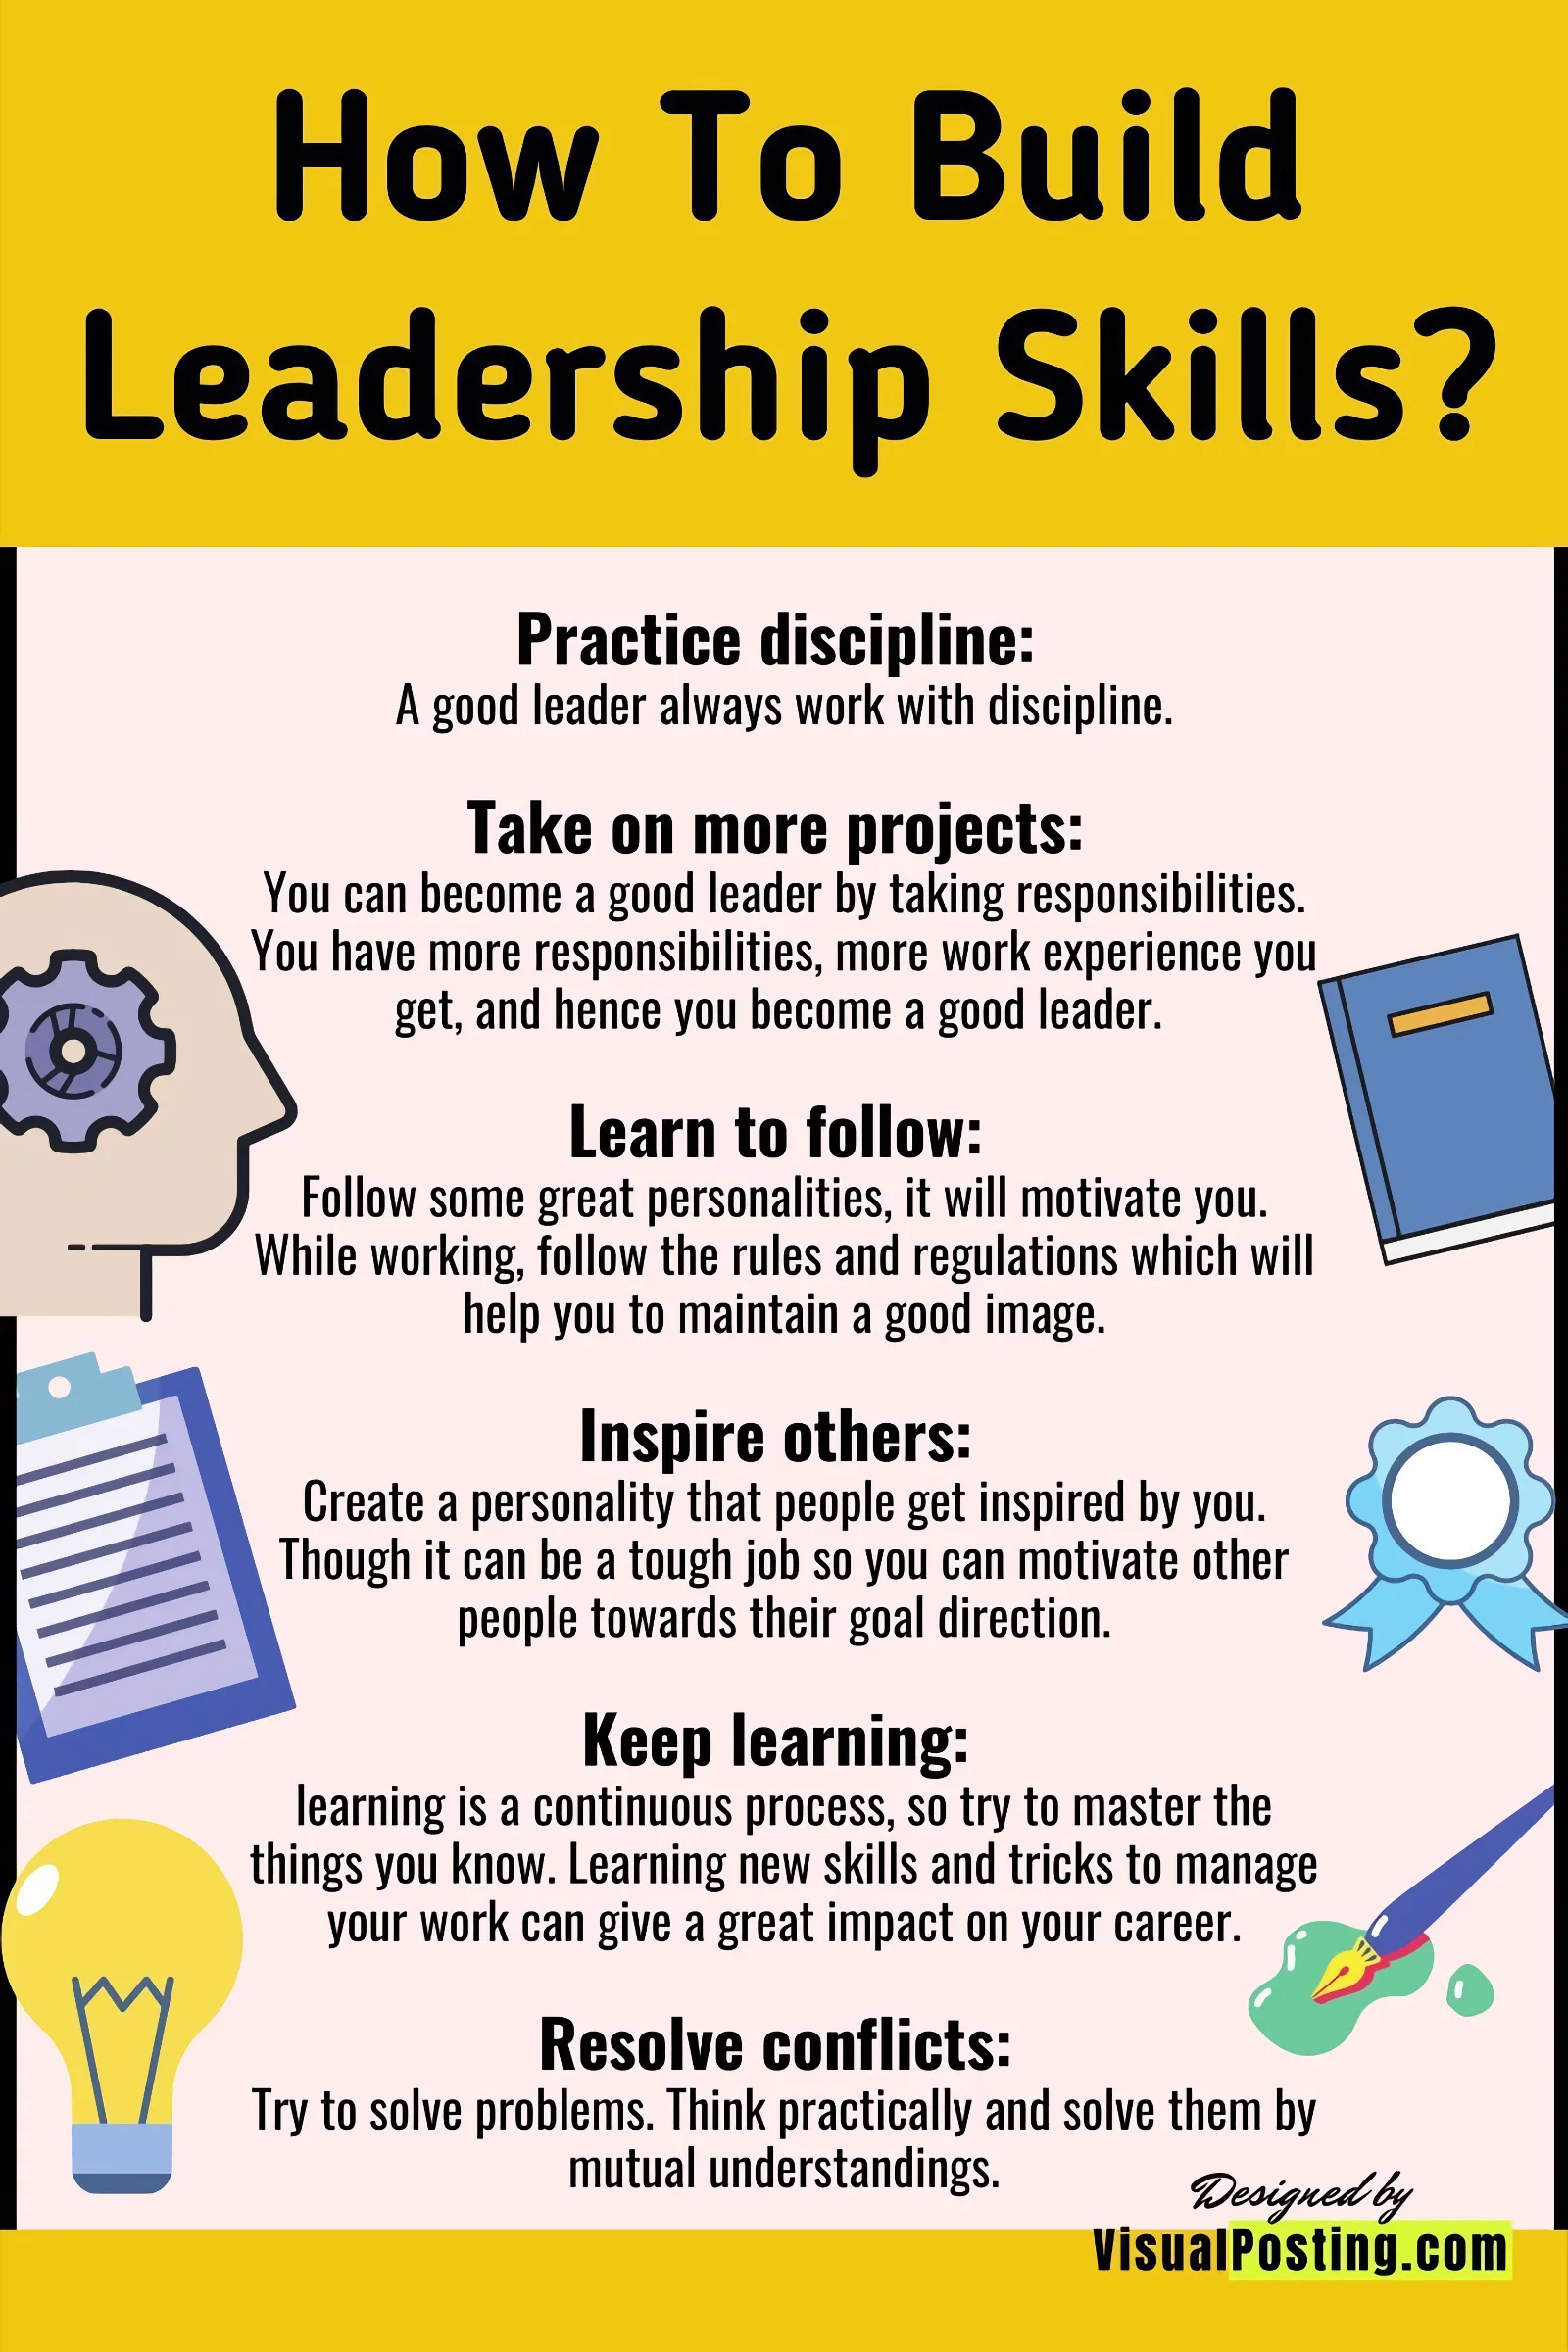 How to develop leadership skills and competencies